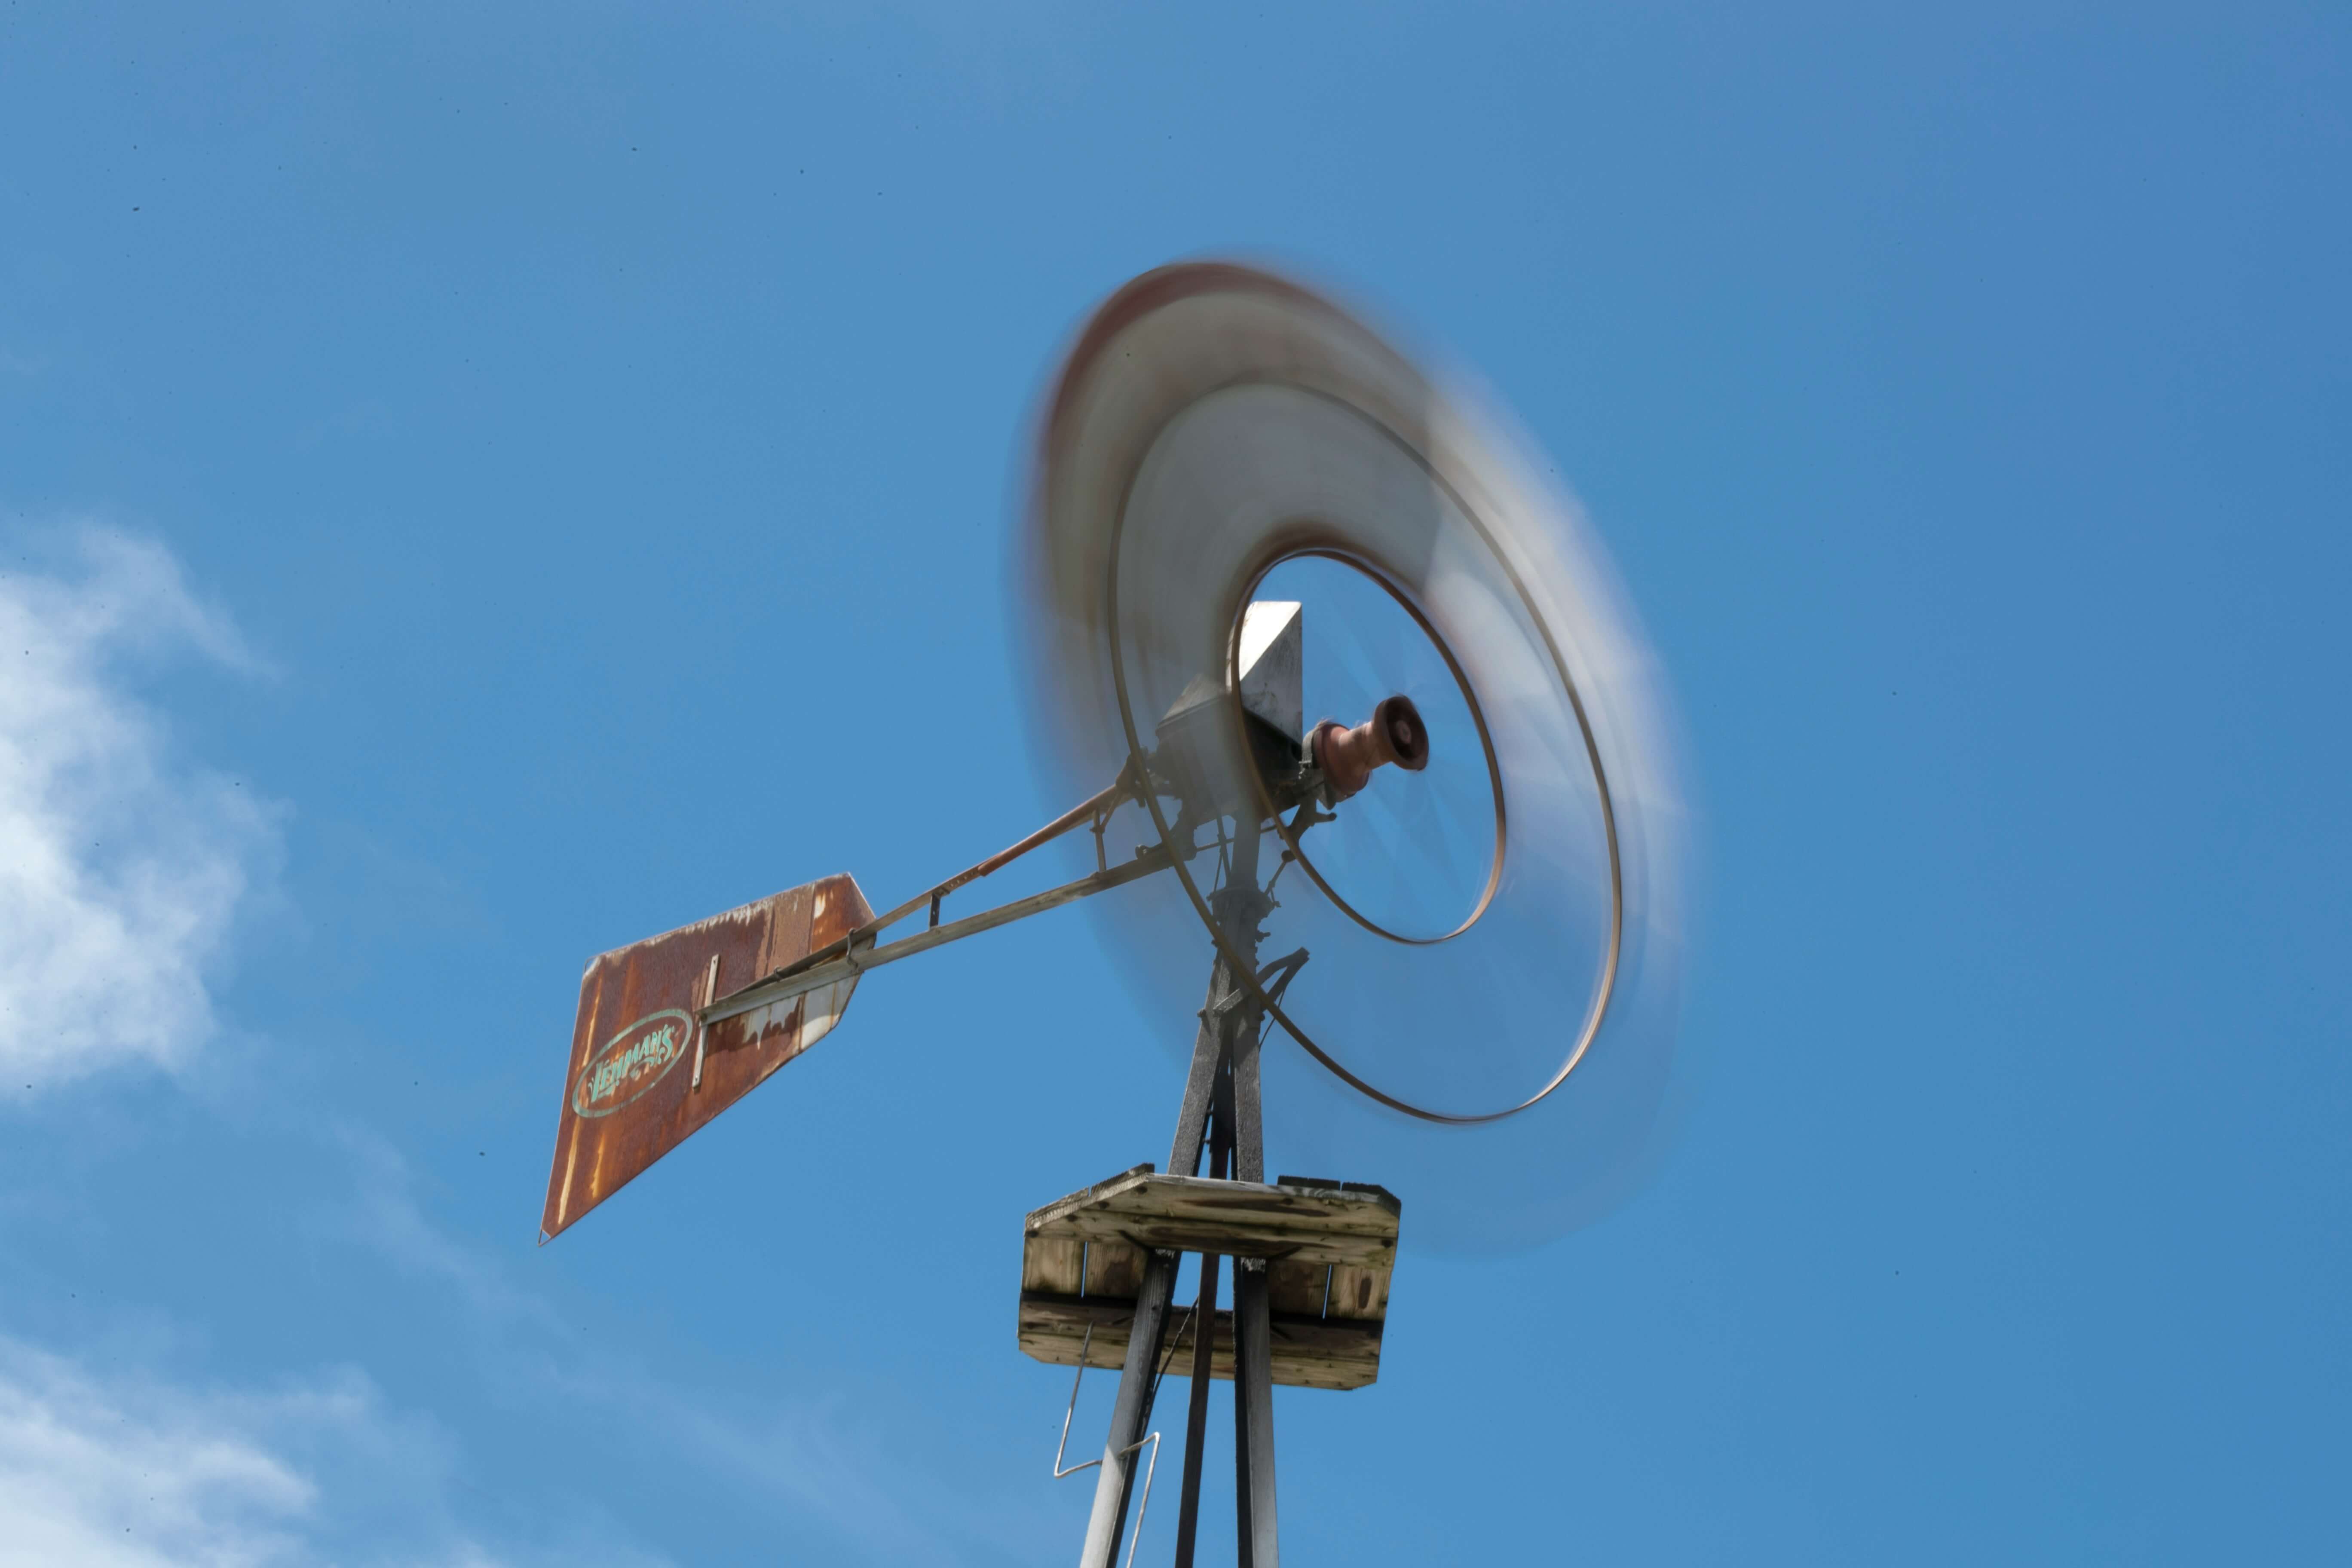 a wind vane measuring the wind direction and speed